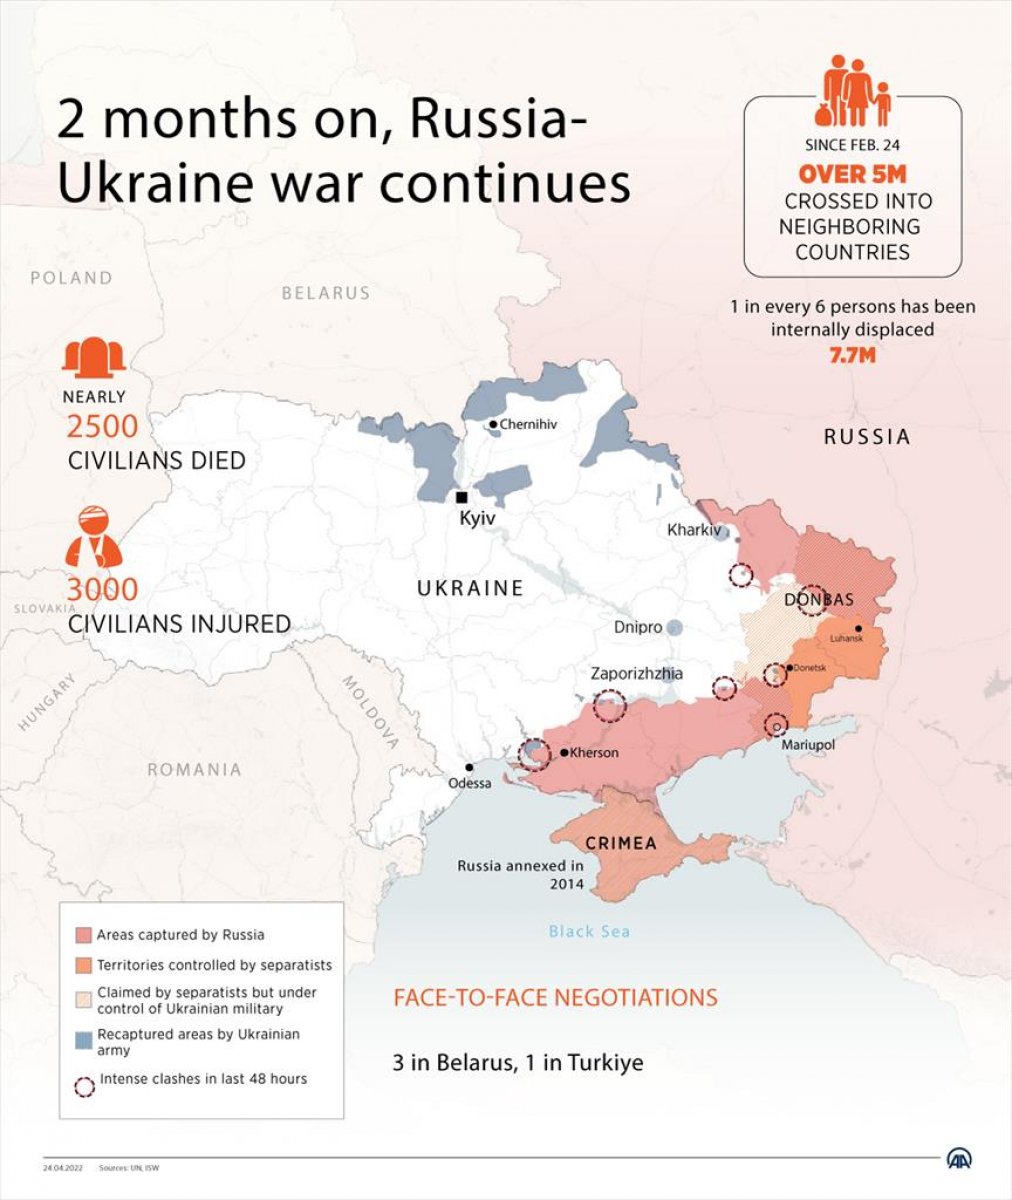 Situation on the ground after 2 months in the Ukraine-Russia war #2